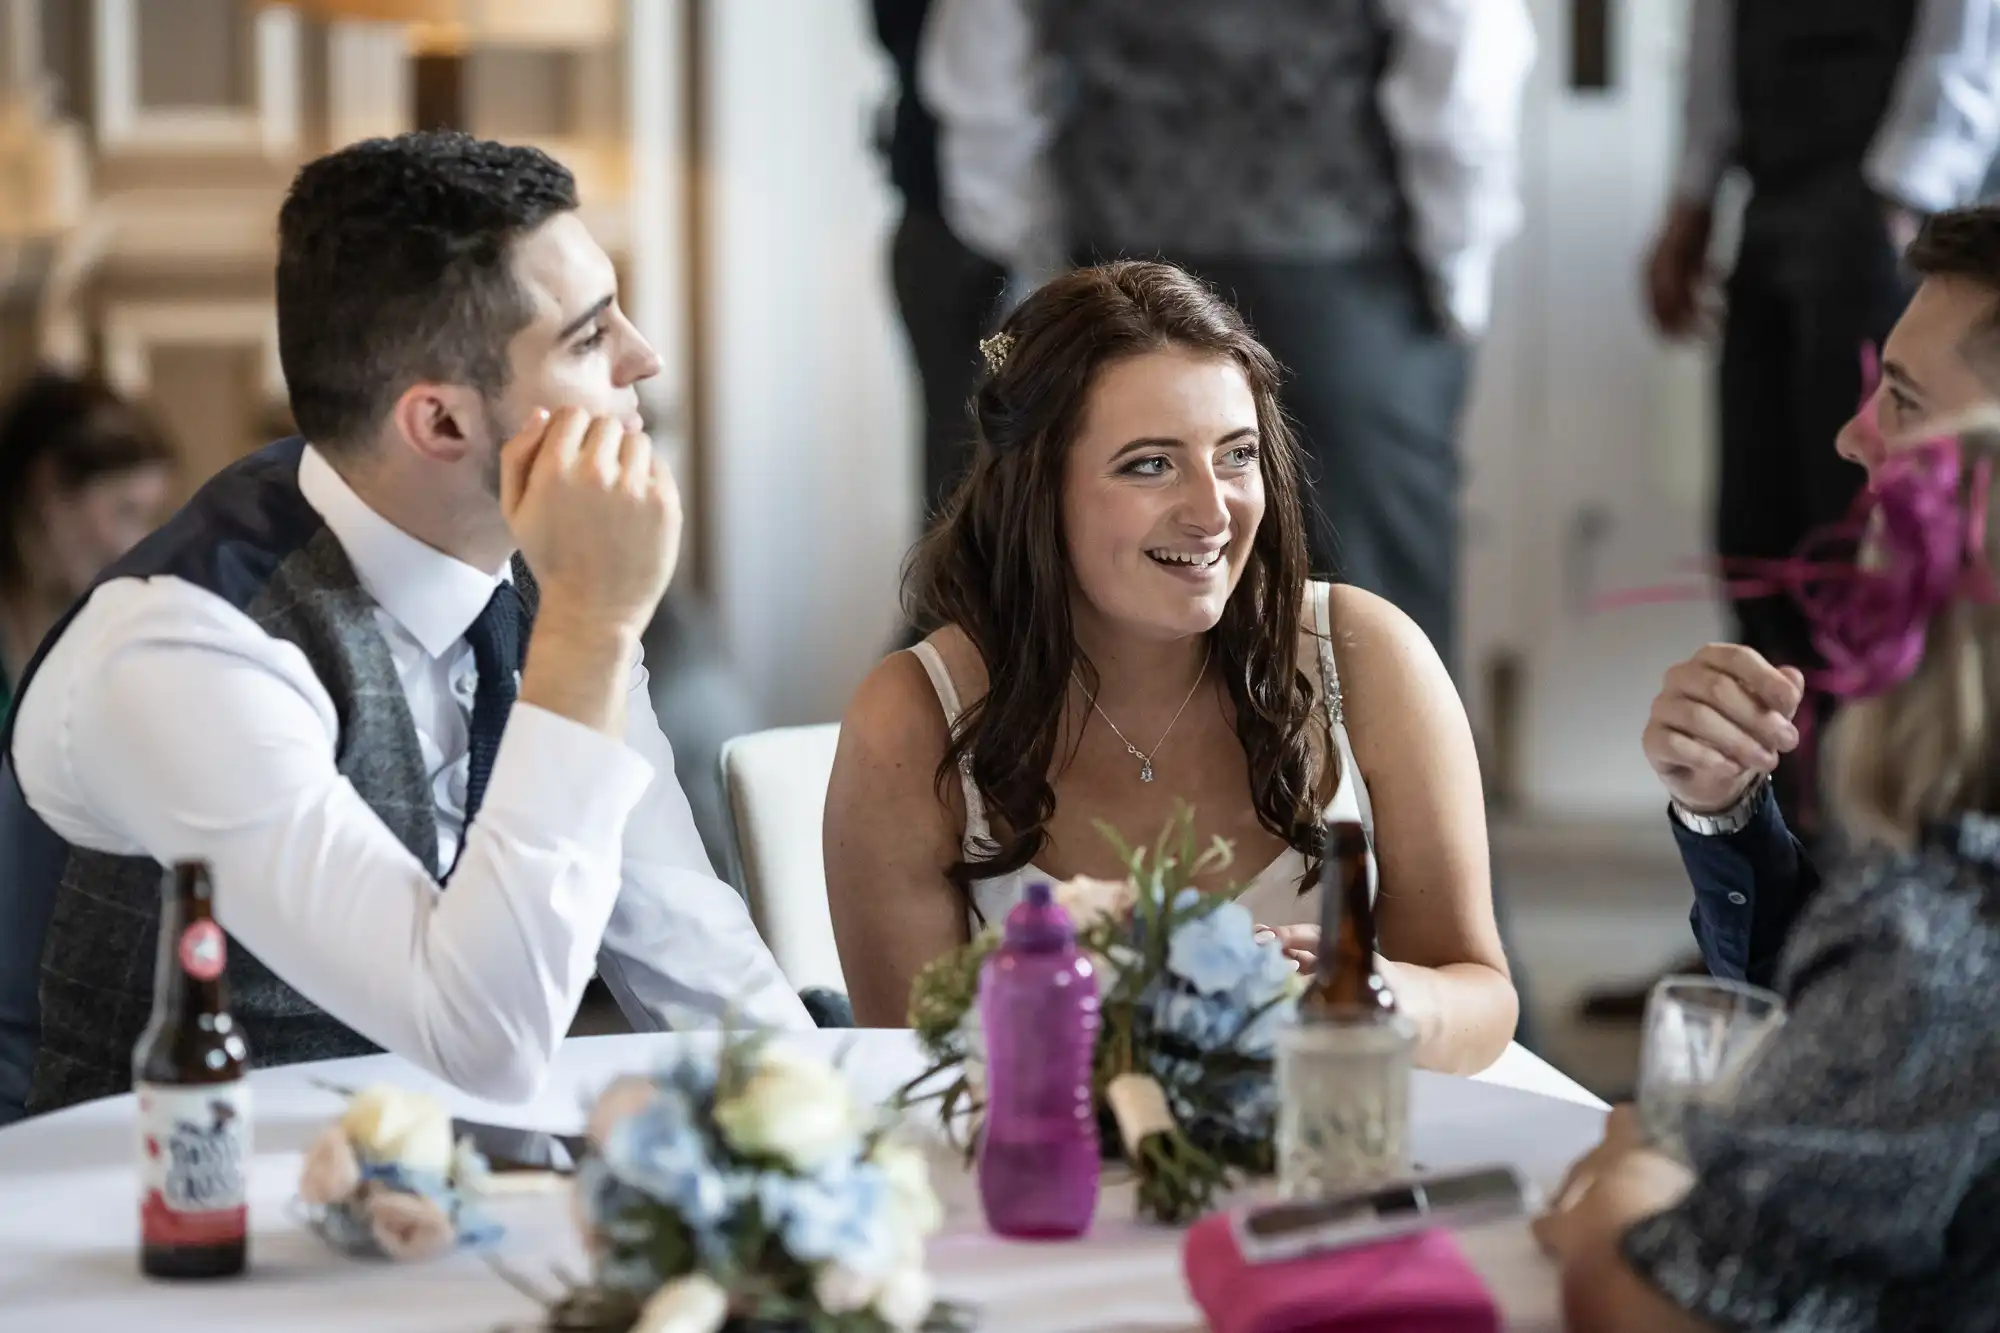 A woman and two men engaged in conversation at a wedding reception table, with refreshments and floral decorations visible.